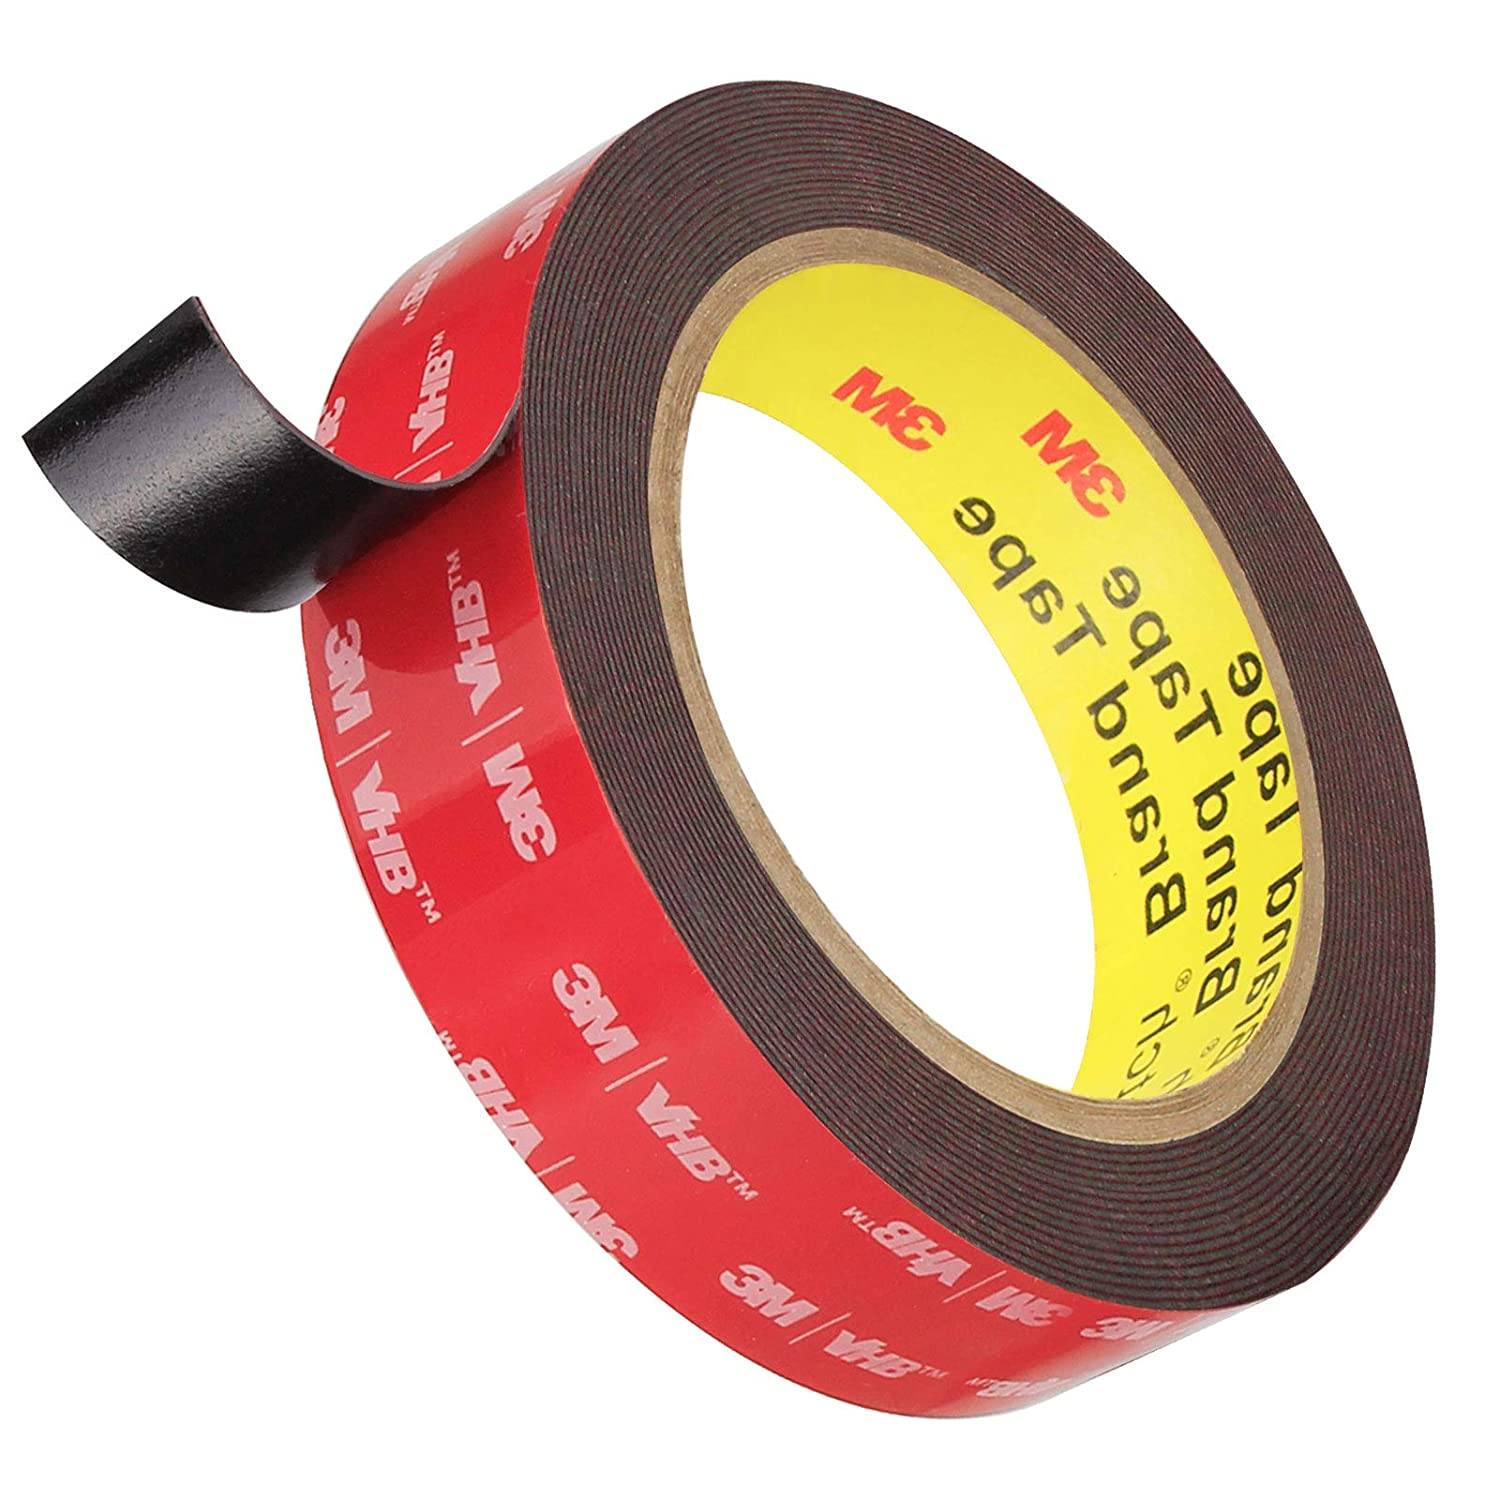 Double Sided Tape Clear, Heavy Duty Tape, Strong and Permanent for